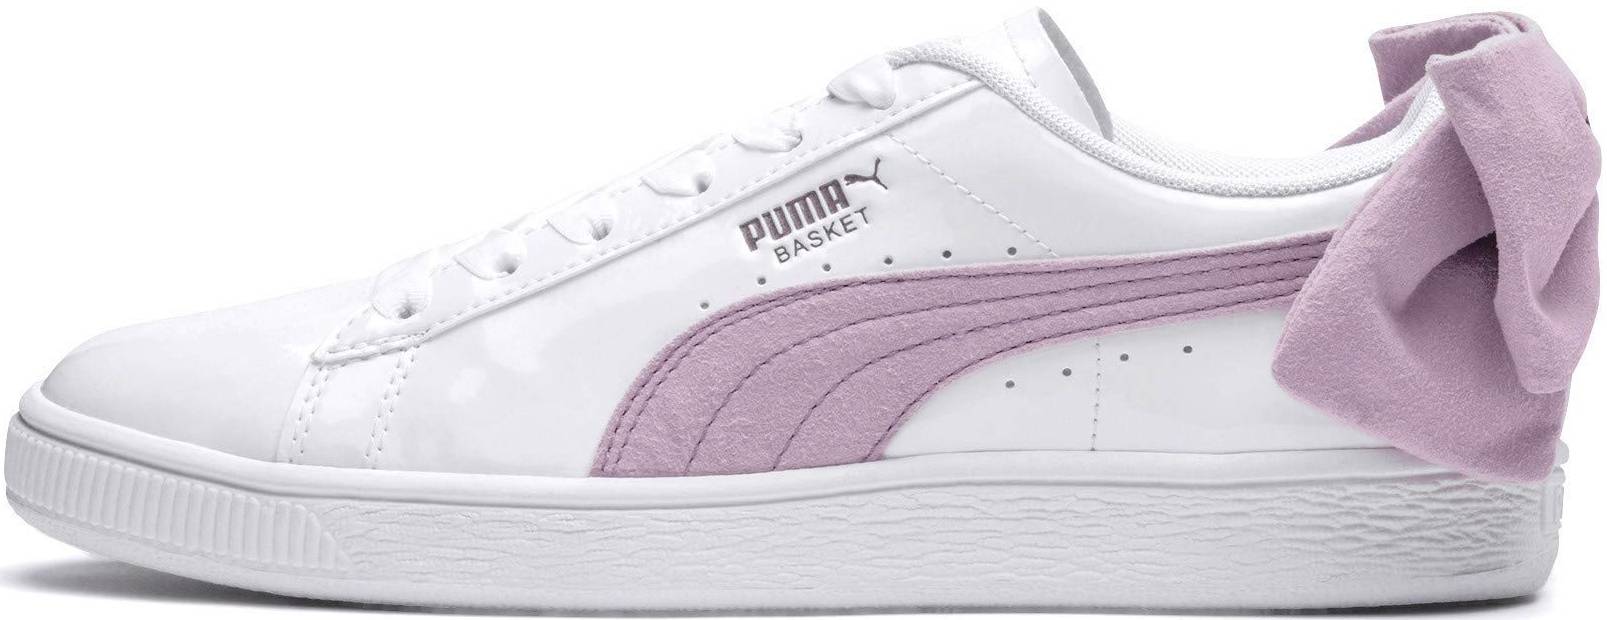 Only $56 + Review of Puma Suede Bow 